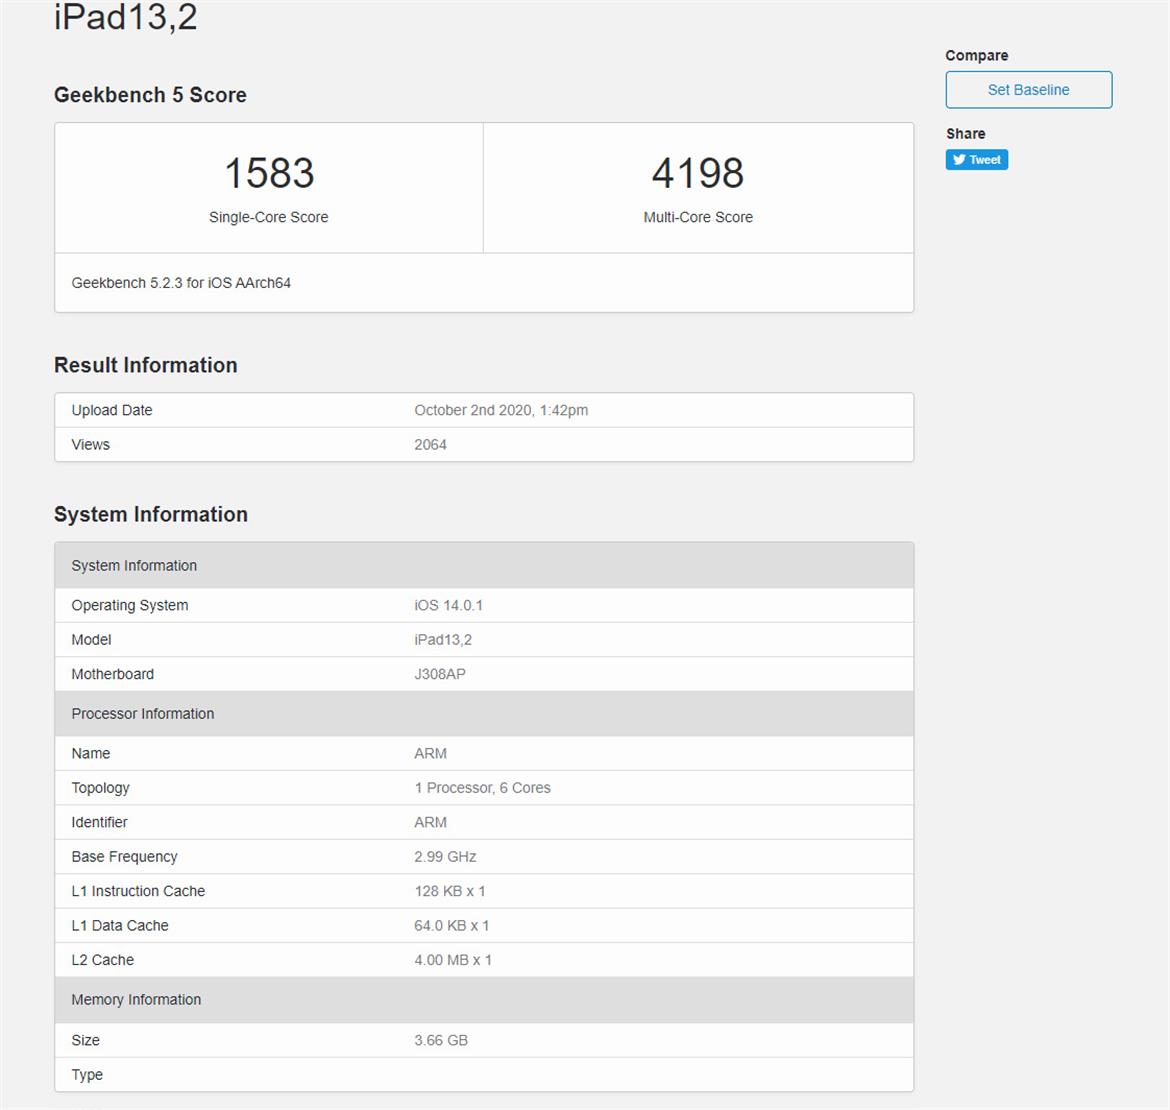 Apple iPad Air A14 Bionic SoC Shows Huge Performance Boost That Bodes Well For iPhone 12